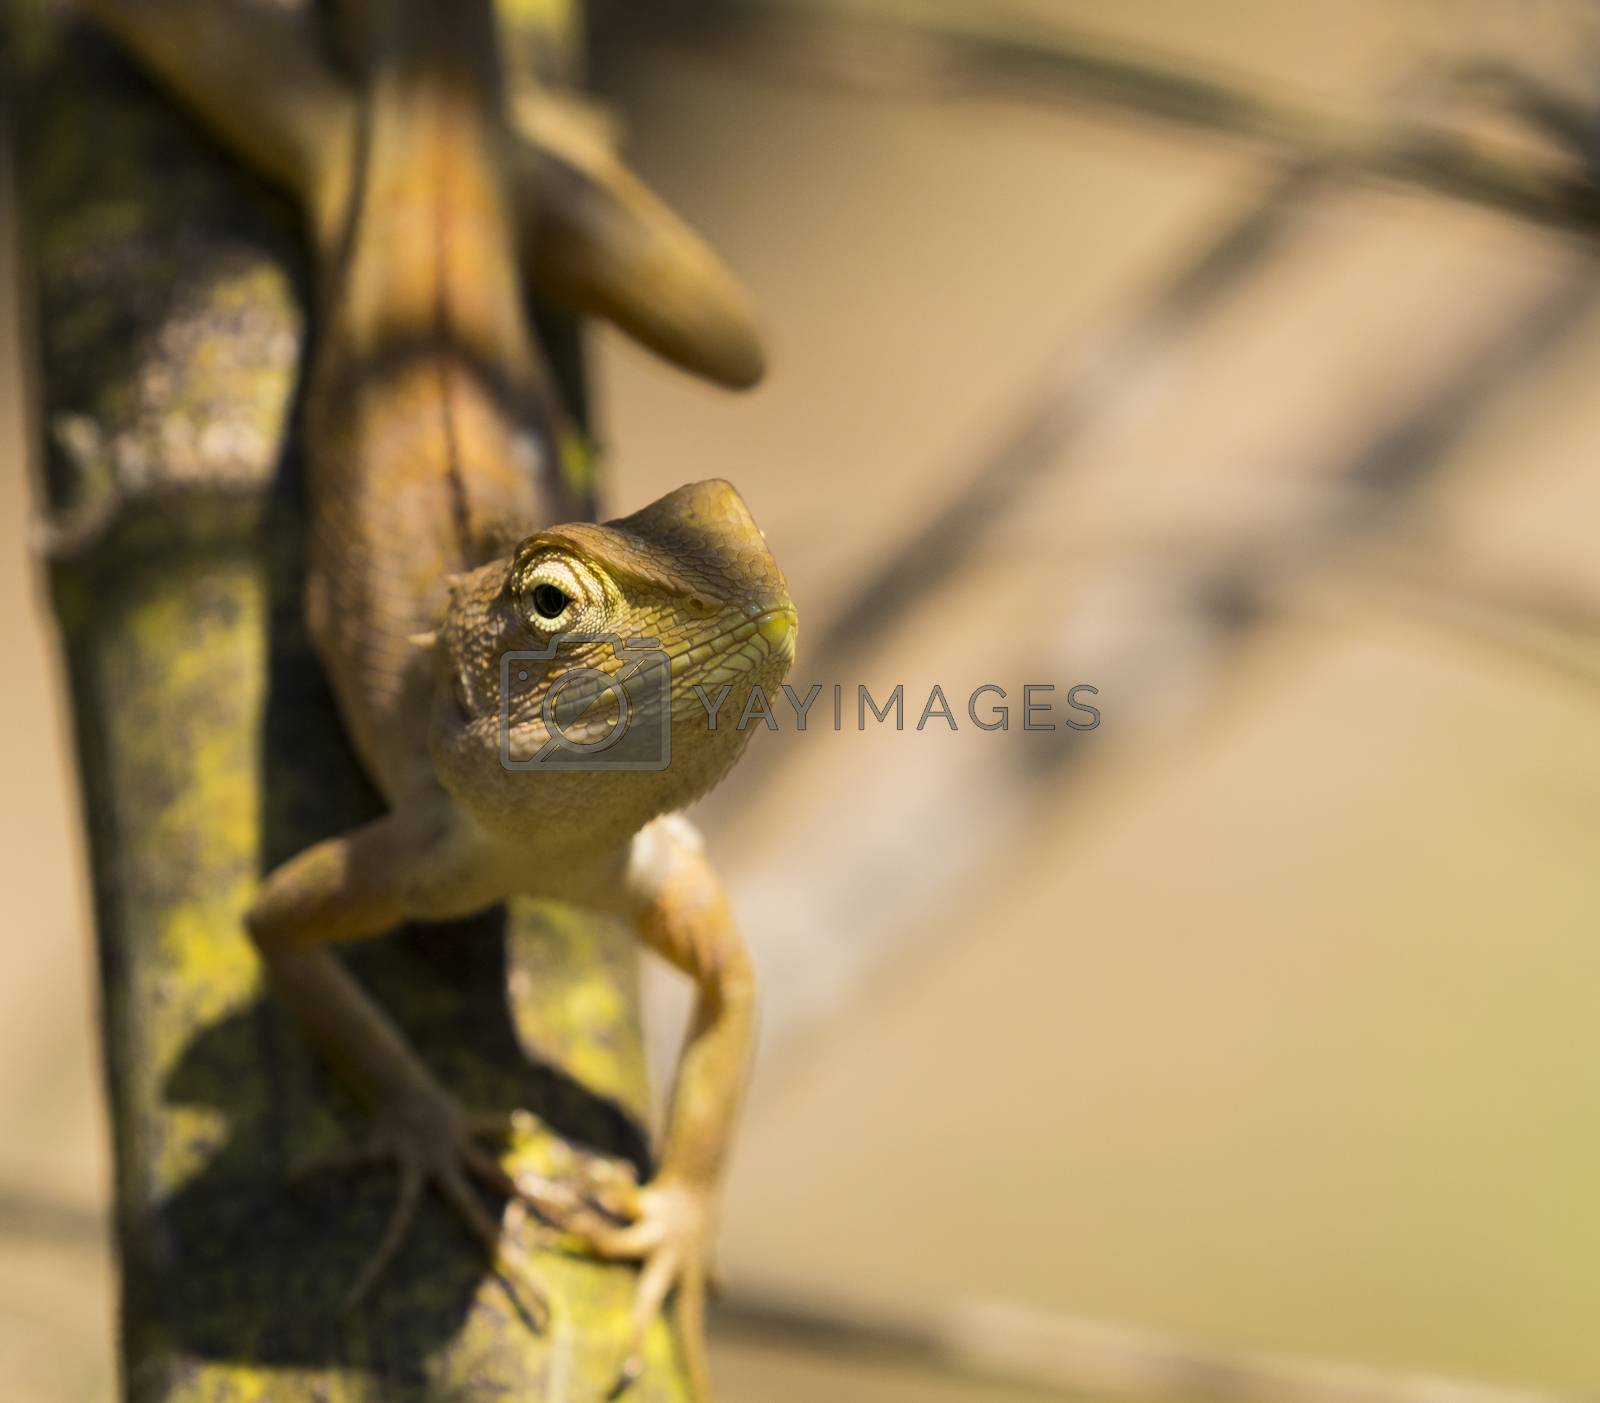 Royalty free image of Image of chameleon on nature background. Reptile by yod67